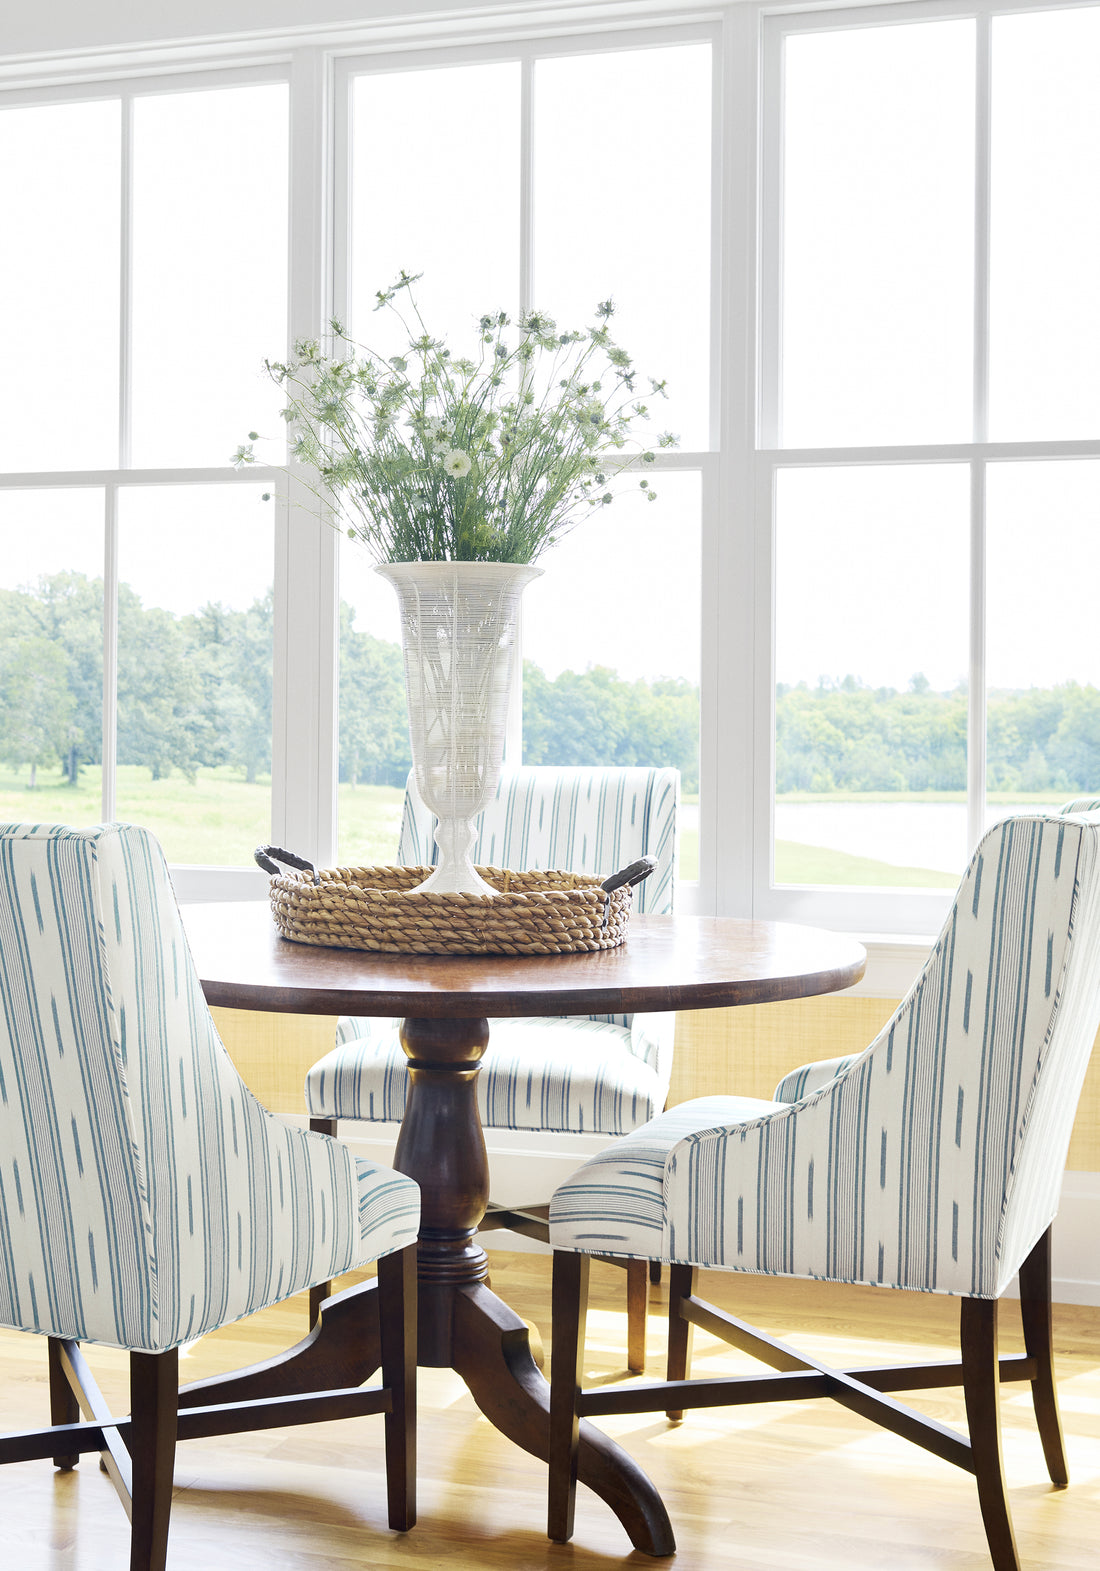 Dining chairs in Odeshia Stripe fabric in seaglass color - pattern number W781305 - by Thibaut in the Montecito collection